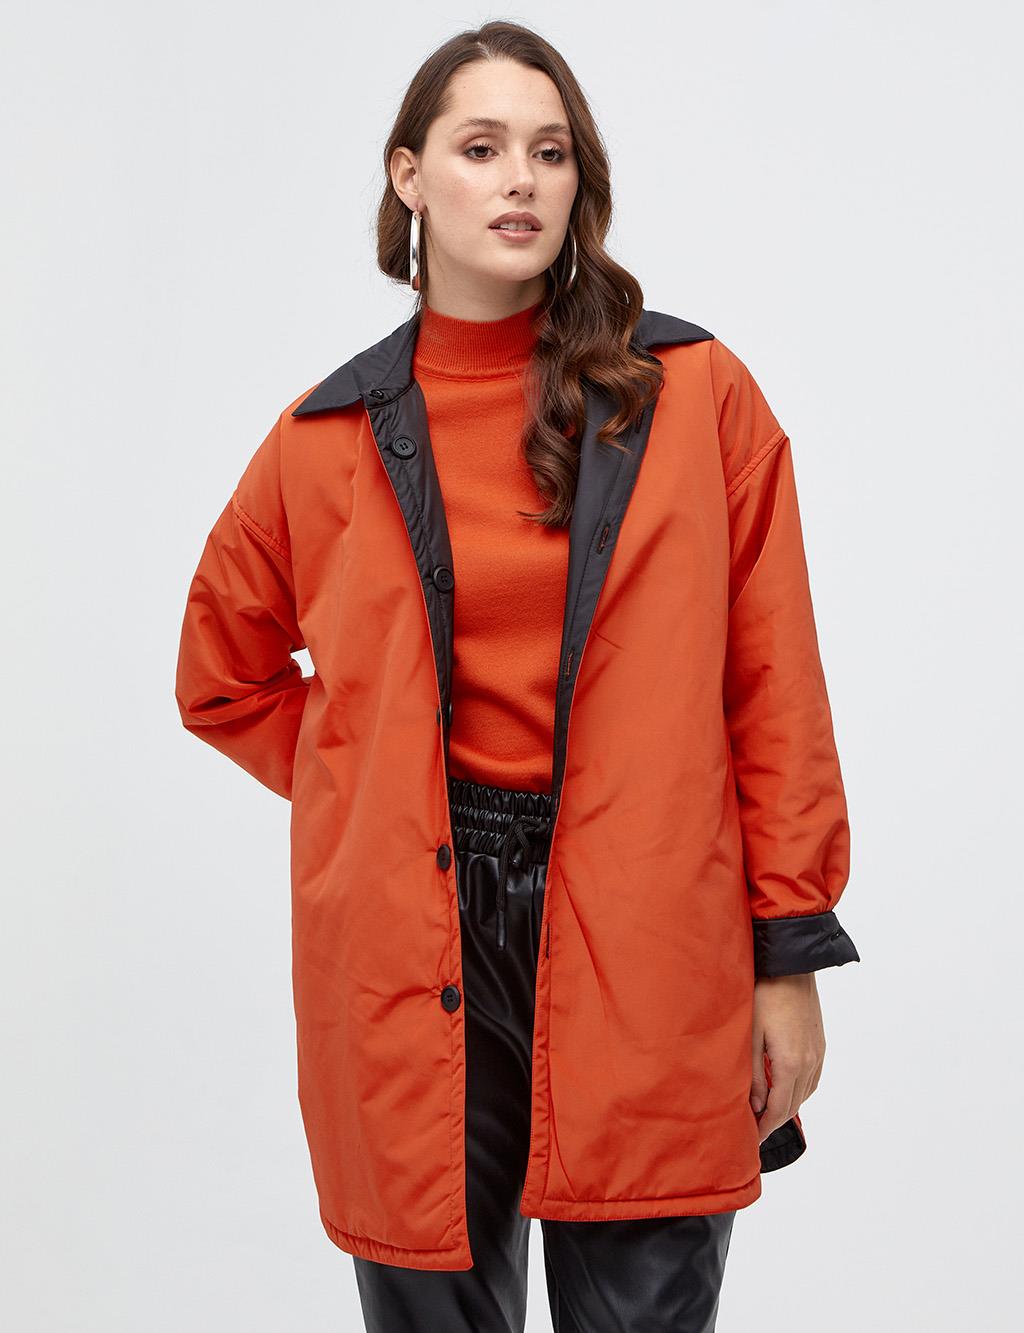 Double Sided Jacket Coral